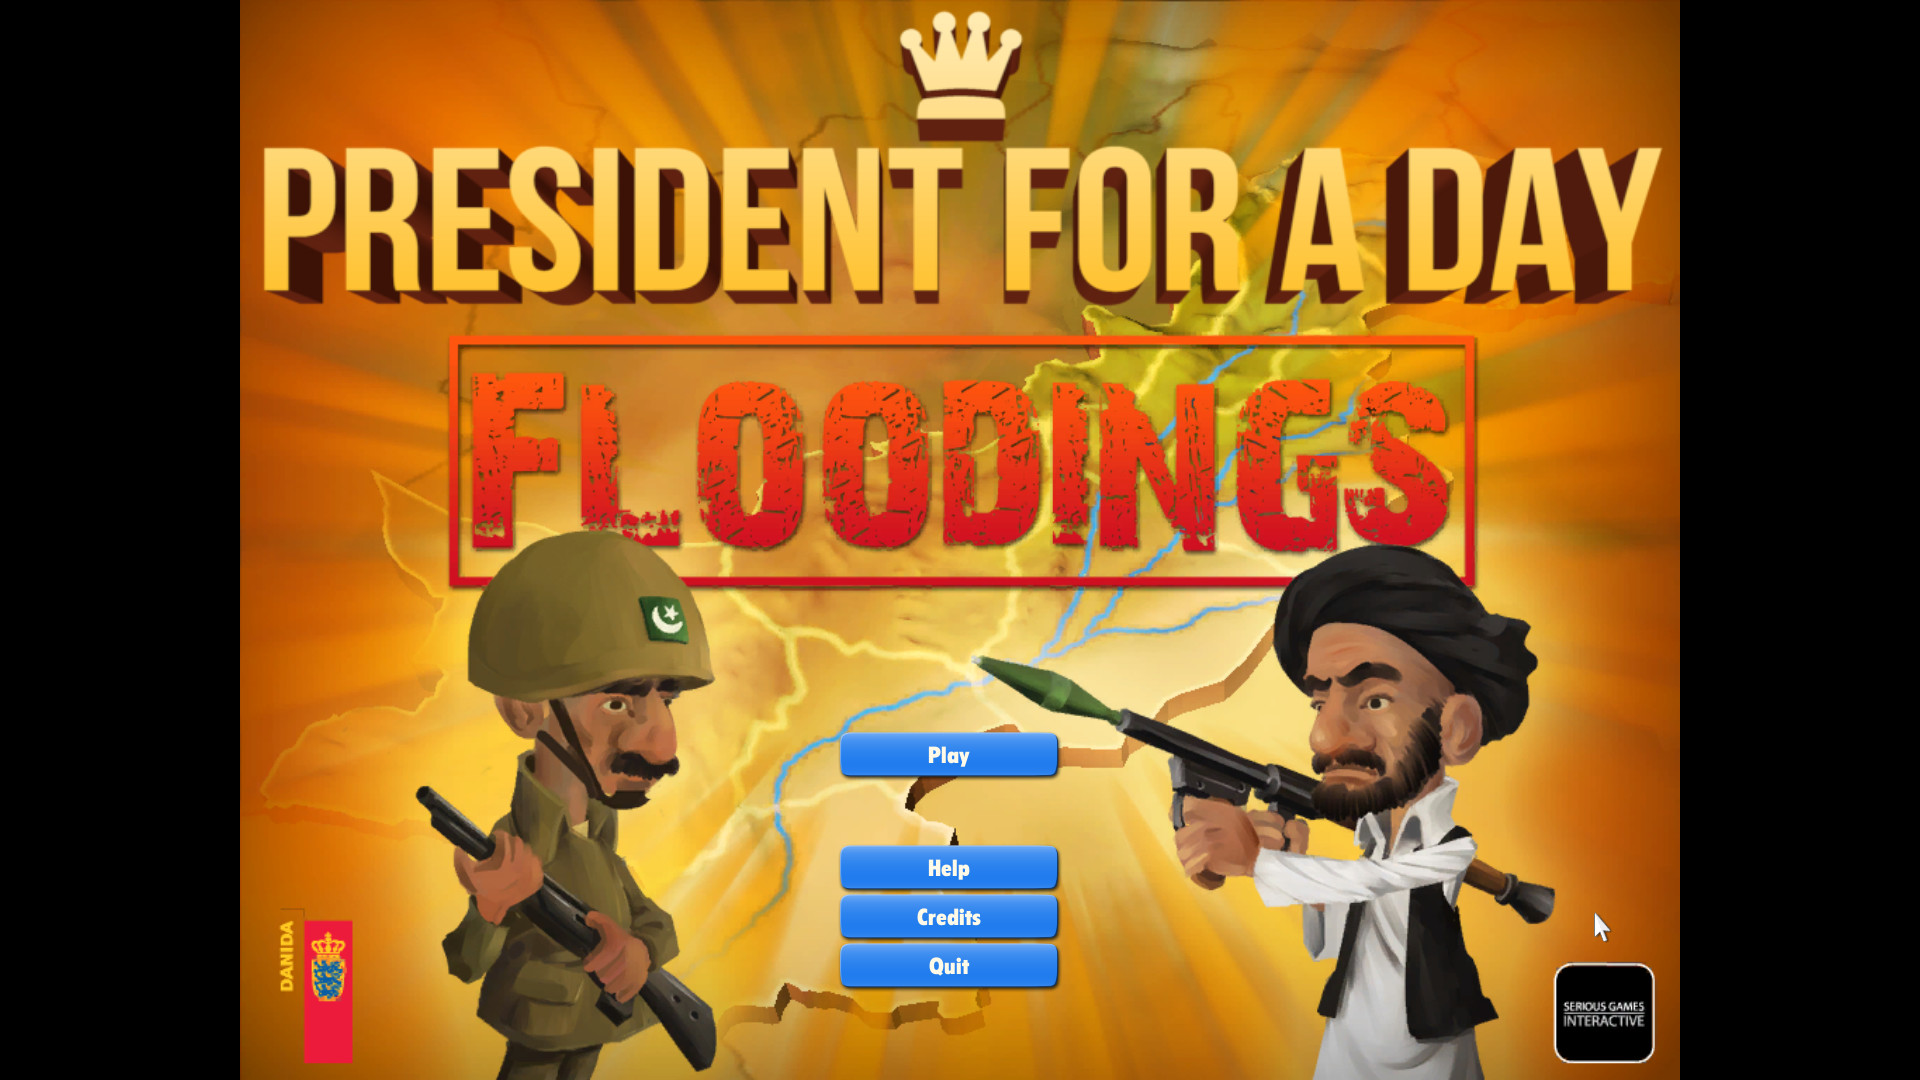 President for a Day - Floodings screenshot